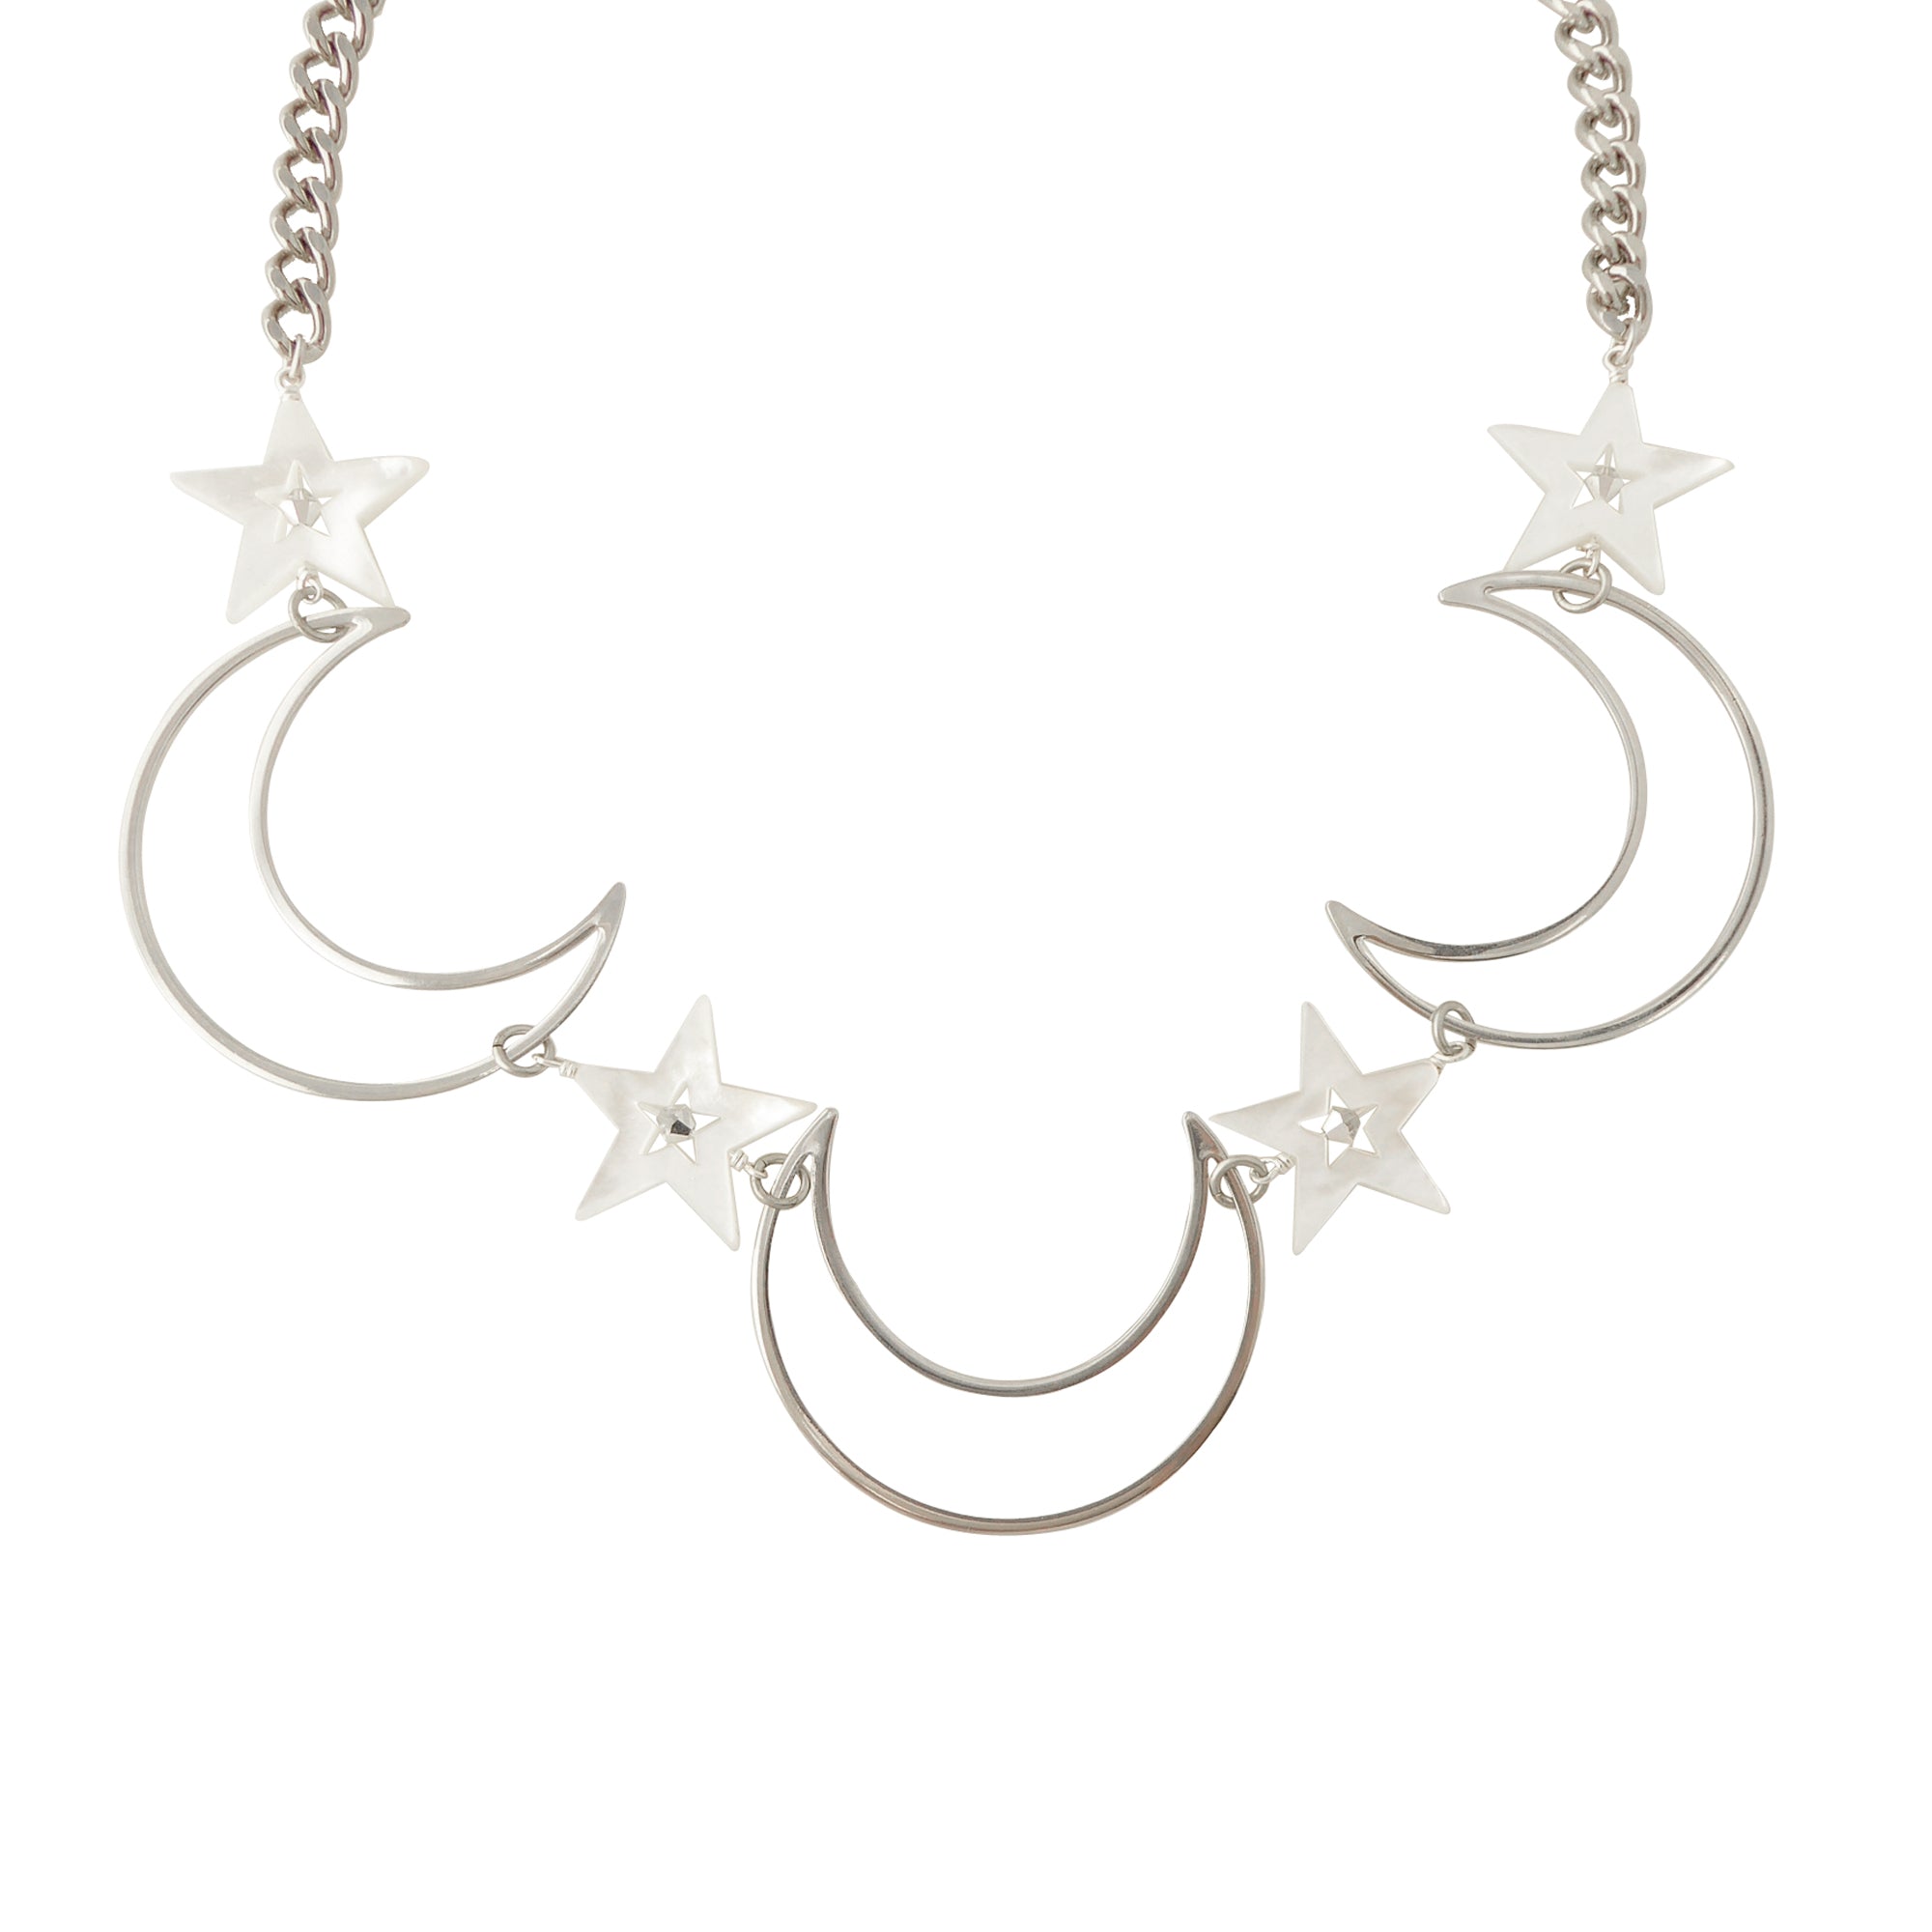 Silver crescent moon necklace by Jenny Dayco 1